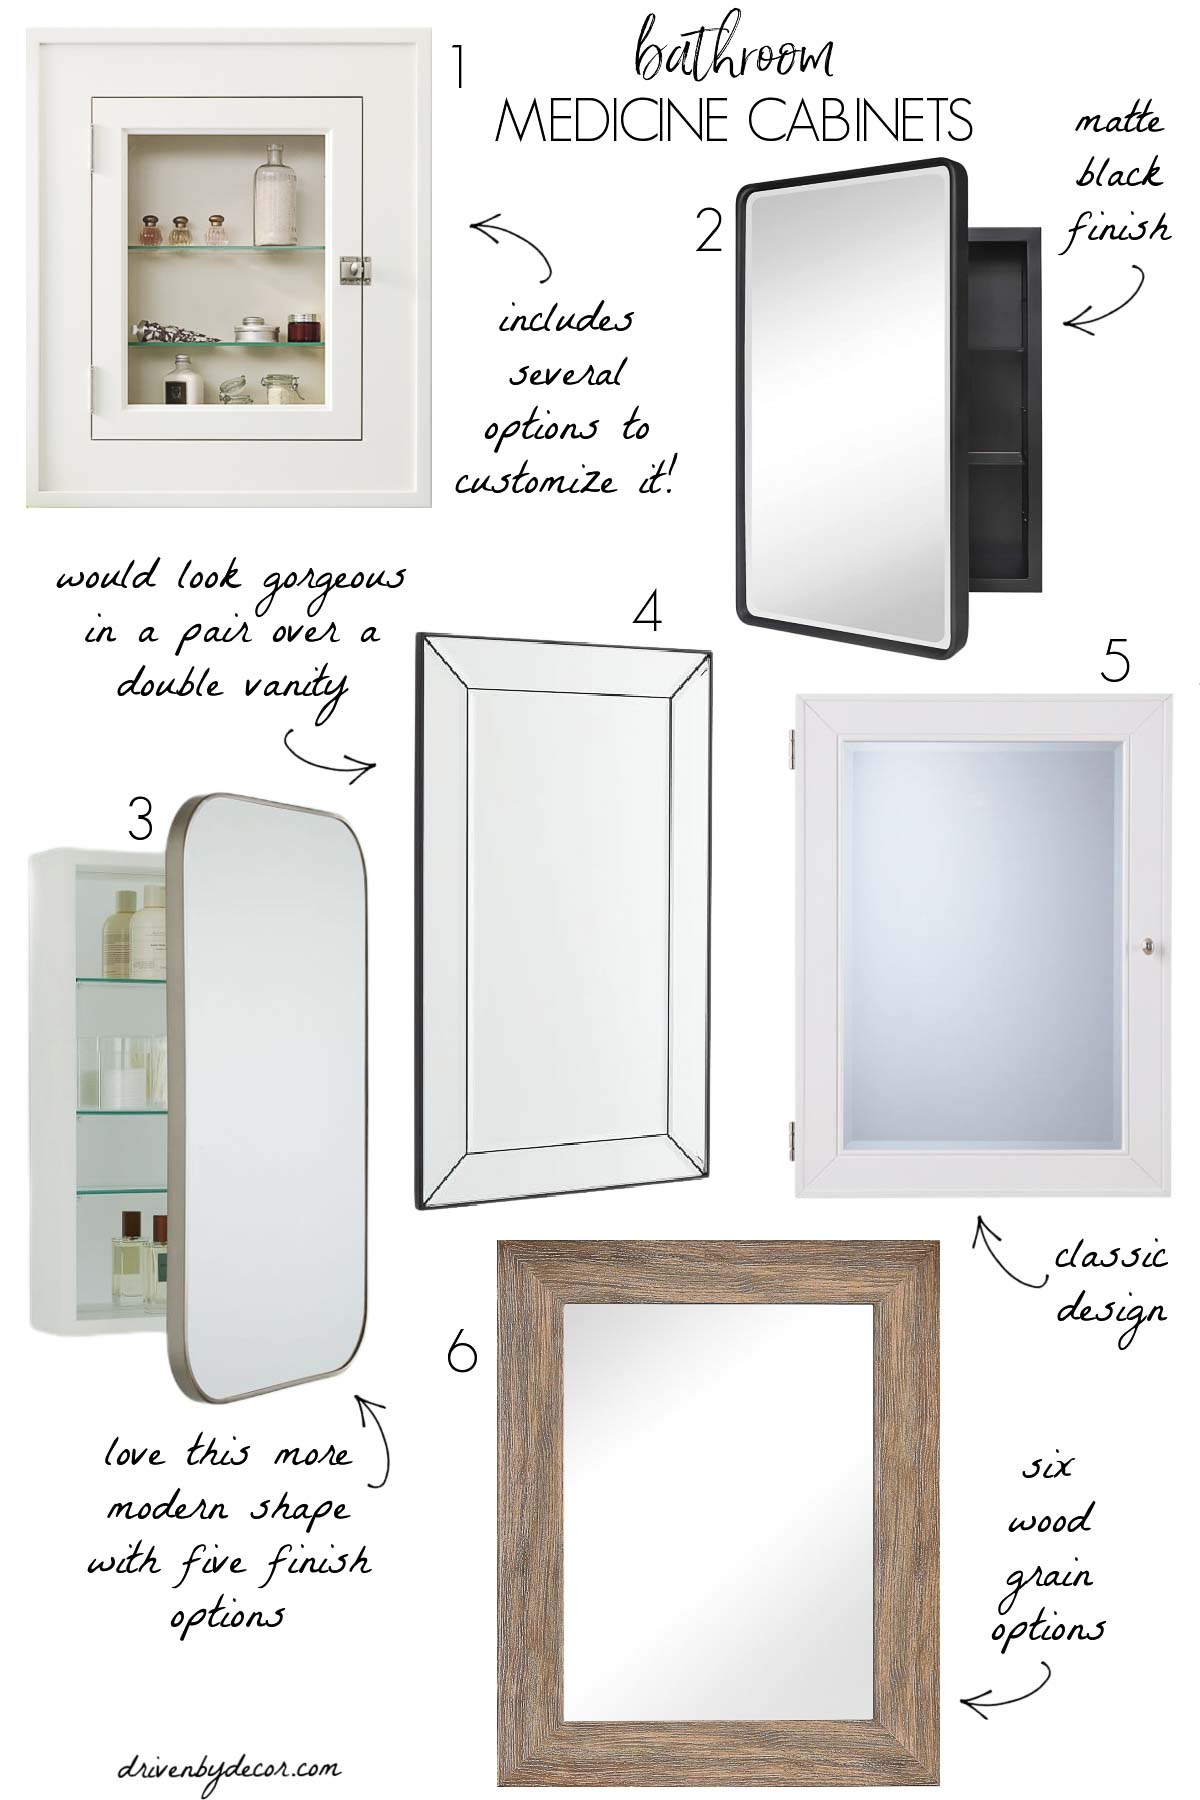 Recessed medicine cabinets allow tons of extra bathroom storage!